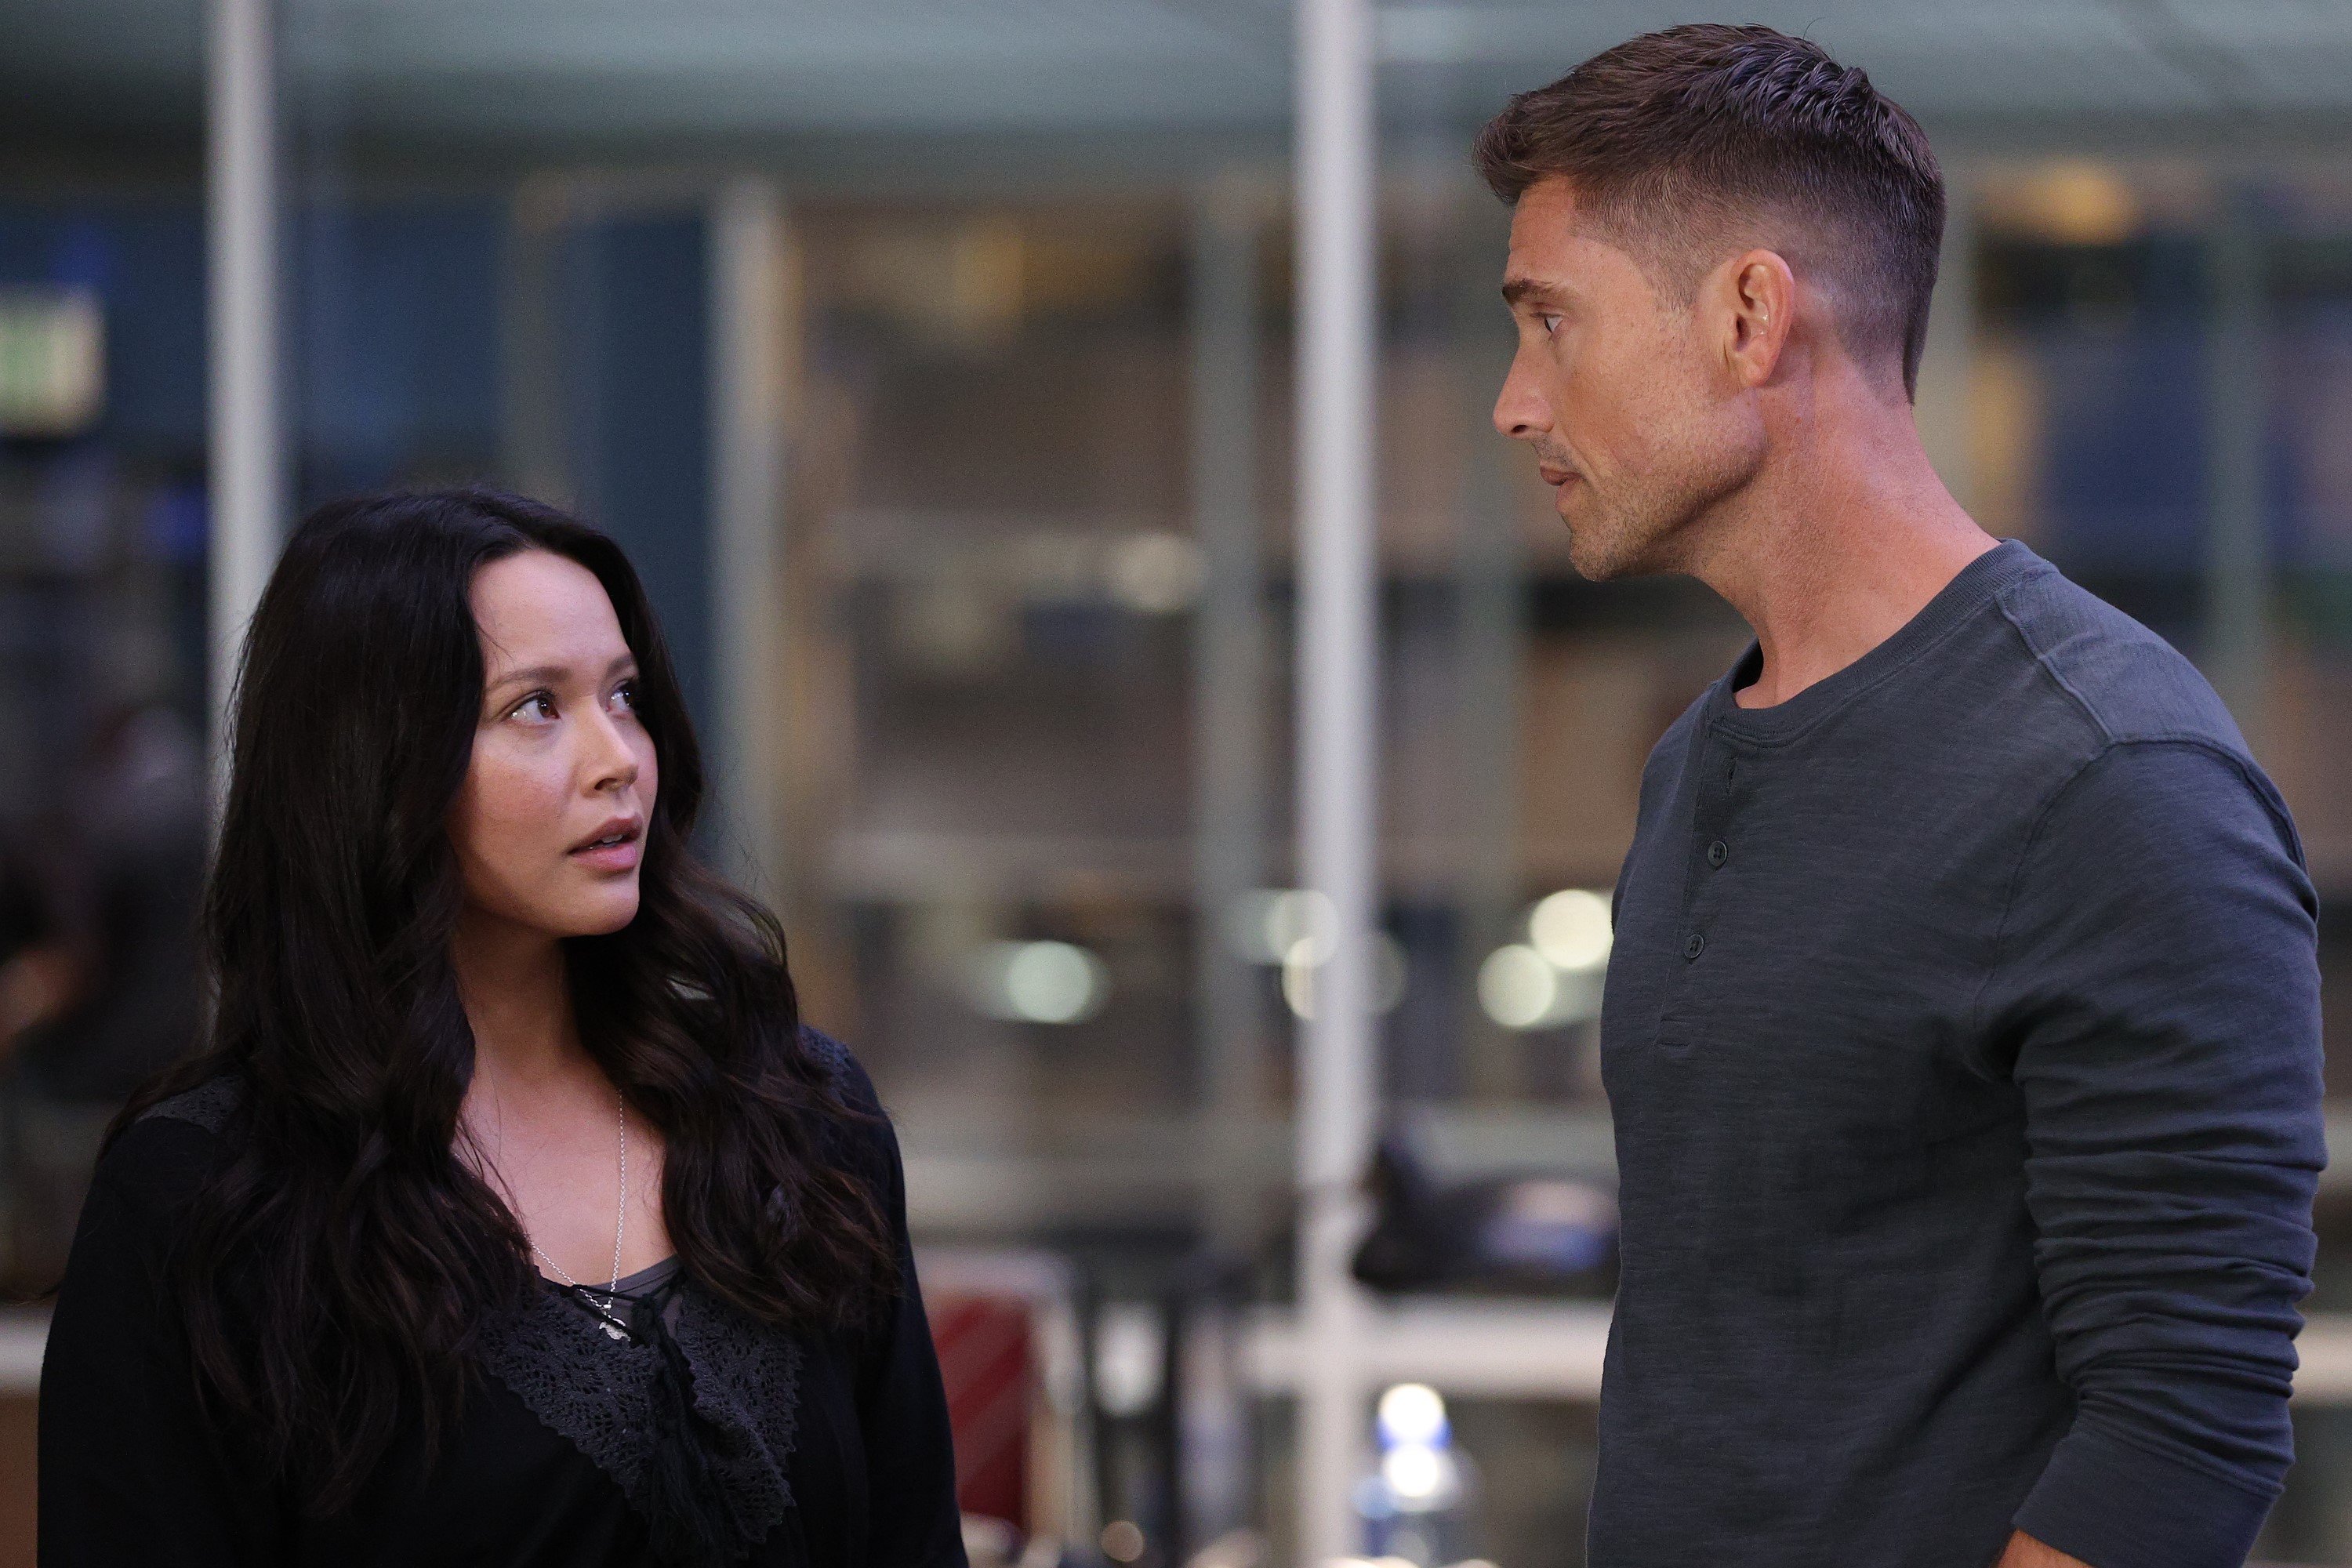 Melissa O'Neil as Lucy Chen and Eric Winter as Tim Bradford